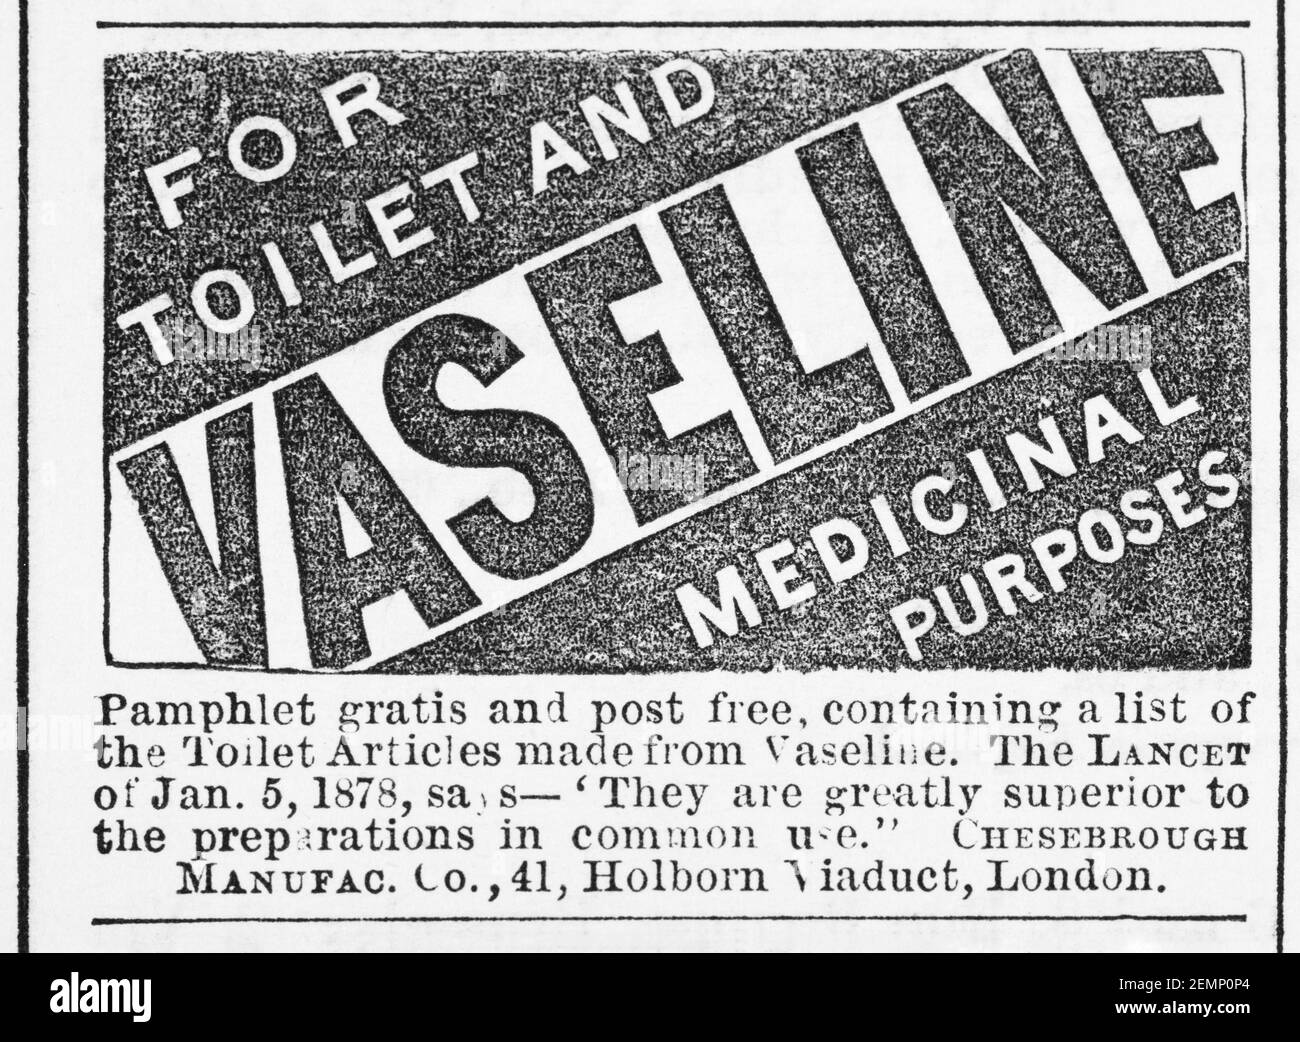 Old Victorian Vaseline advert from 1880 - before the dawn of advertising standards. History of advertising, old hygiene & medical product adverts. Stock Photo